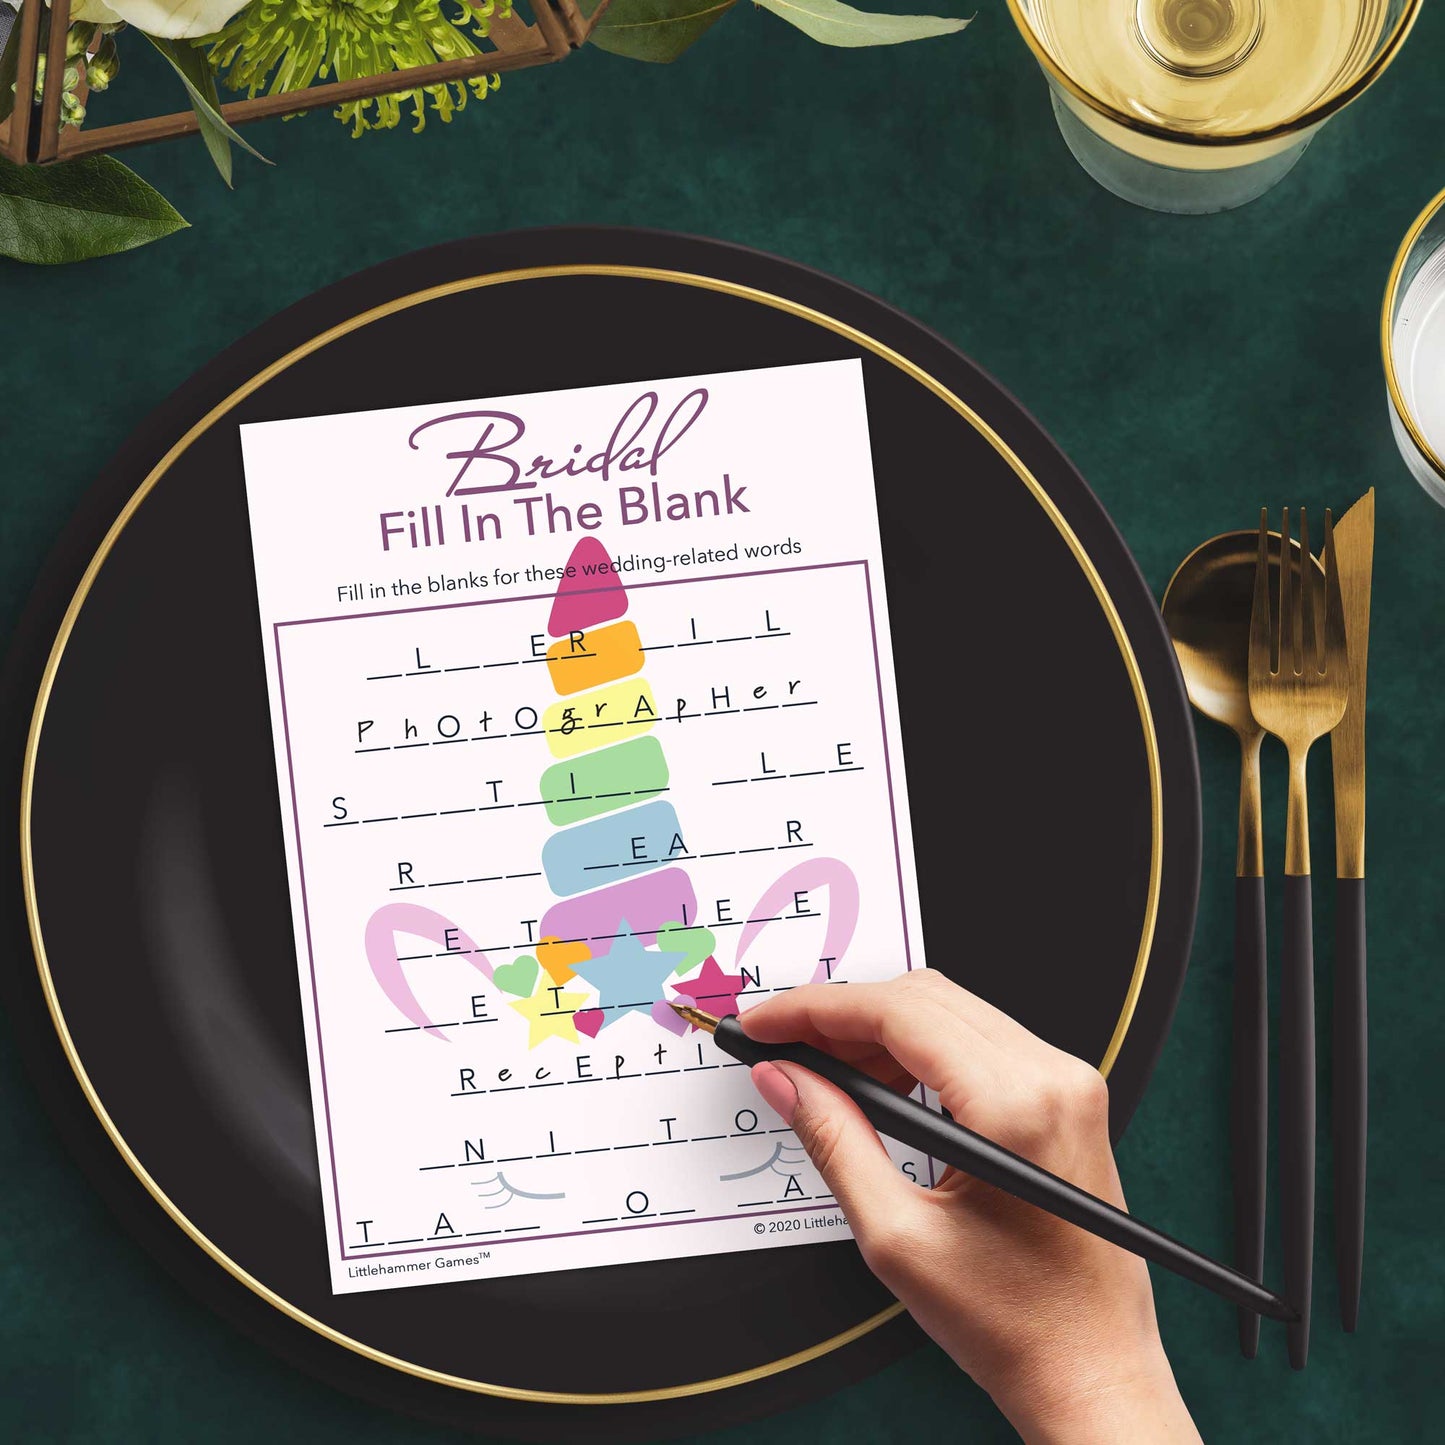 Woman with a pen playing a unicorn-themed Bridal Fill in the Blank game card at a dark place setting